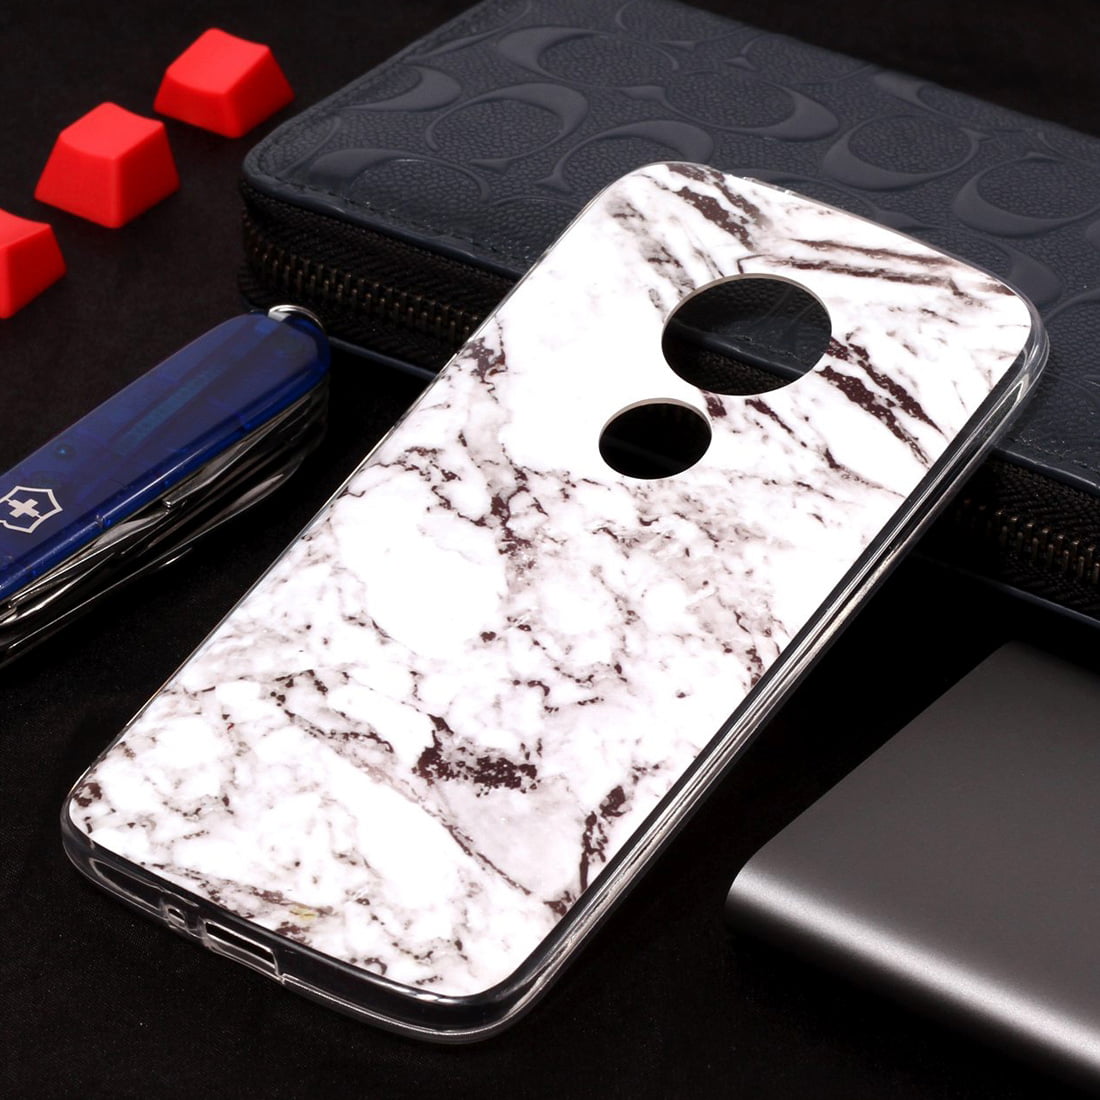 For Moto E5 Play Marble Case and Screen Protector OYIME Luxury Colorful Plating Pattern Skin Design Clear Silicone Rubber Slim Fit Ultra Thin Protective Back Cover Glossy Soft Gel TPU Shell Shockproof Drop Protection Transparent Bumper Case for Motorola M 